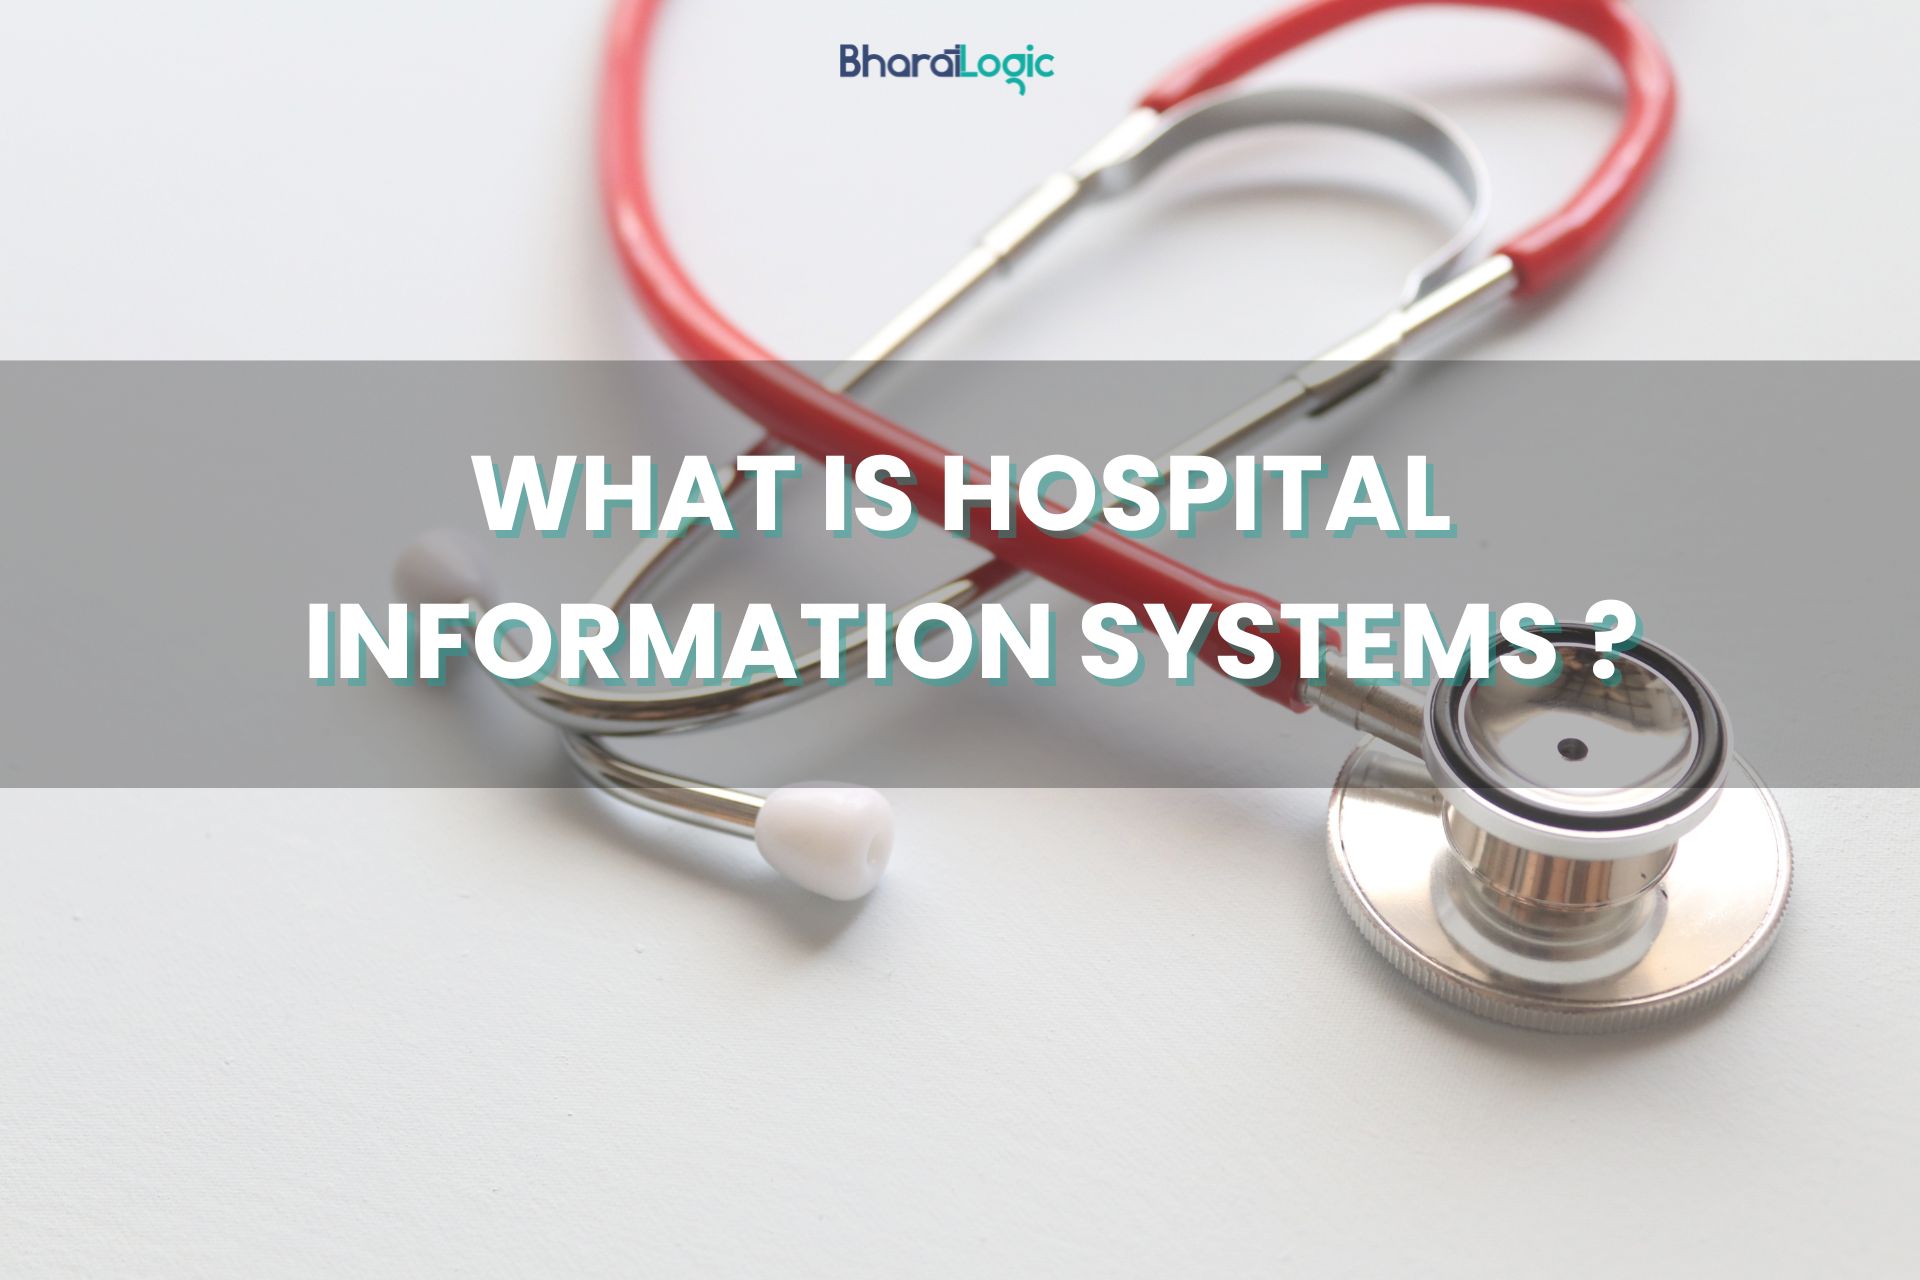 What is Hospital Information Systems